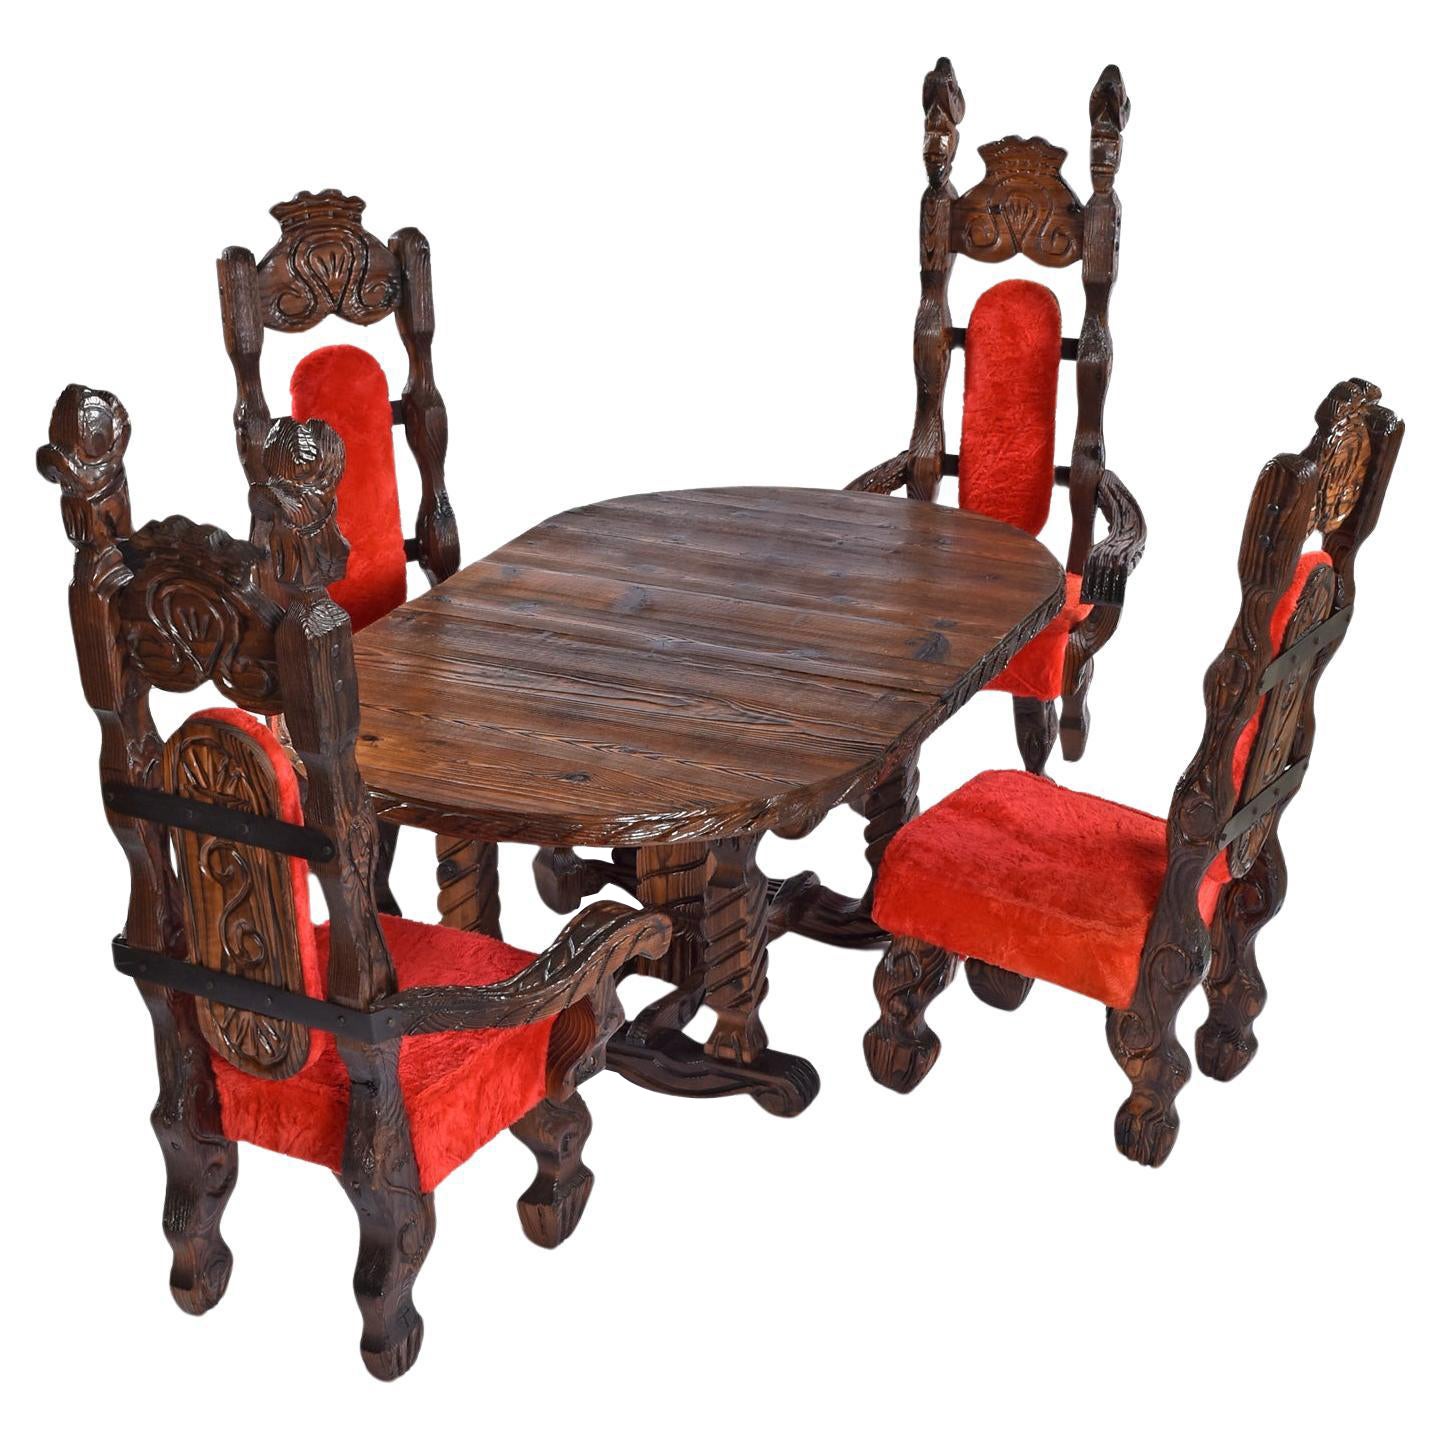 Vintage Witco Rustic geschnitzt Wood Conquistador Dining Set mit rotem Fell Stühle